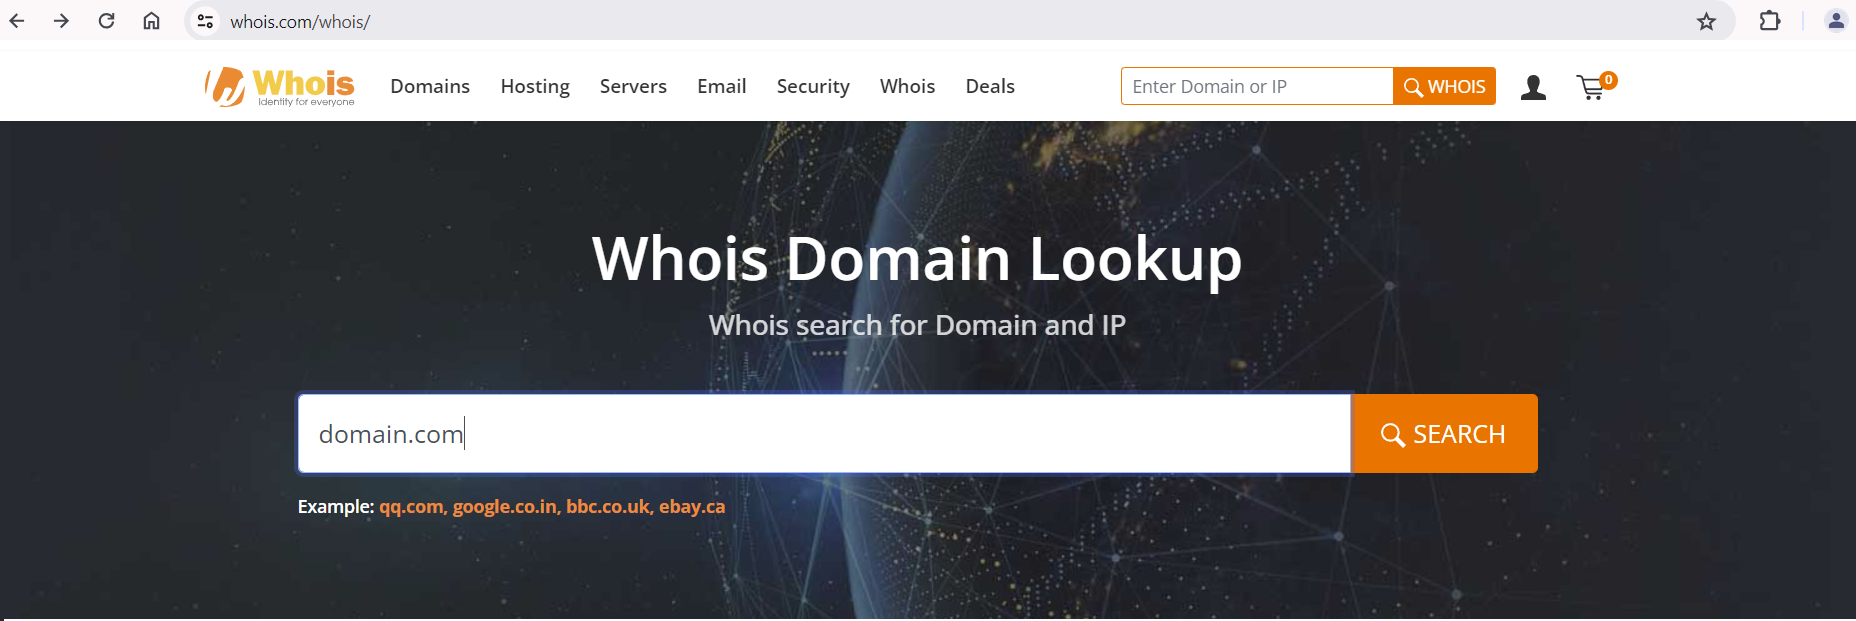 Whois domain search